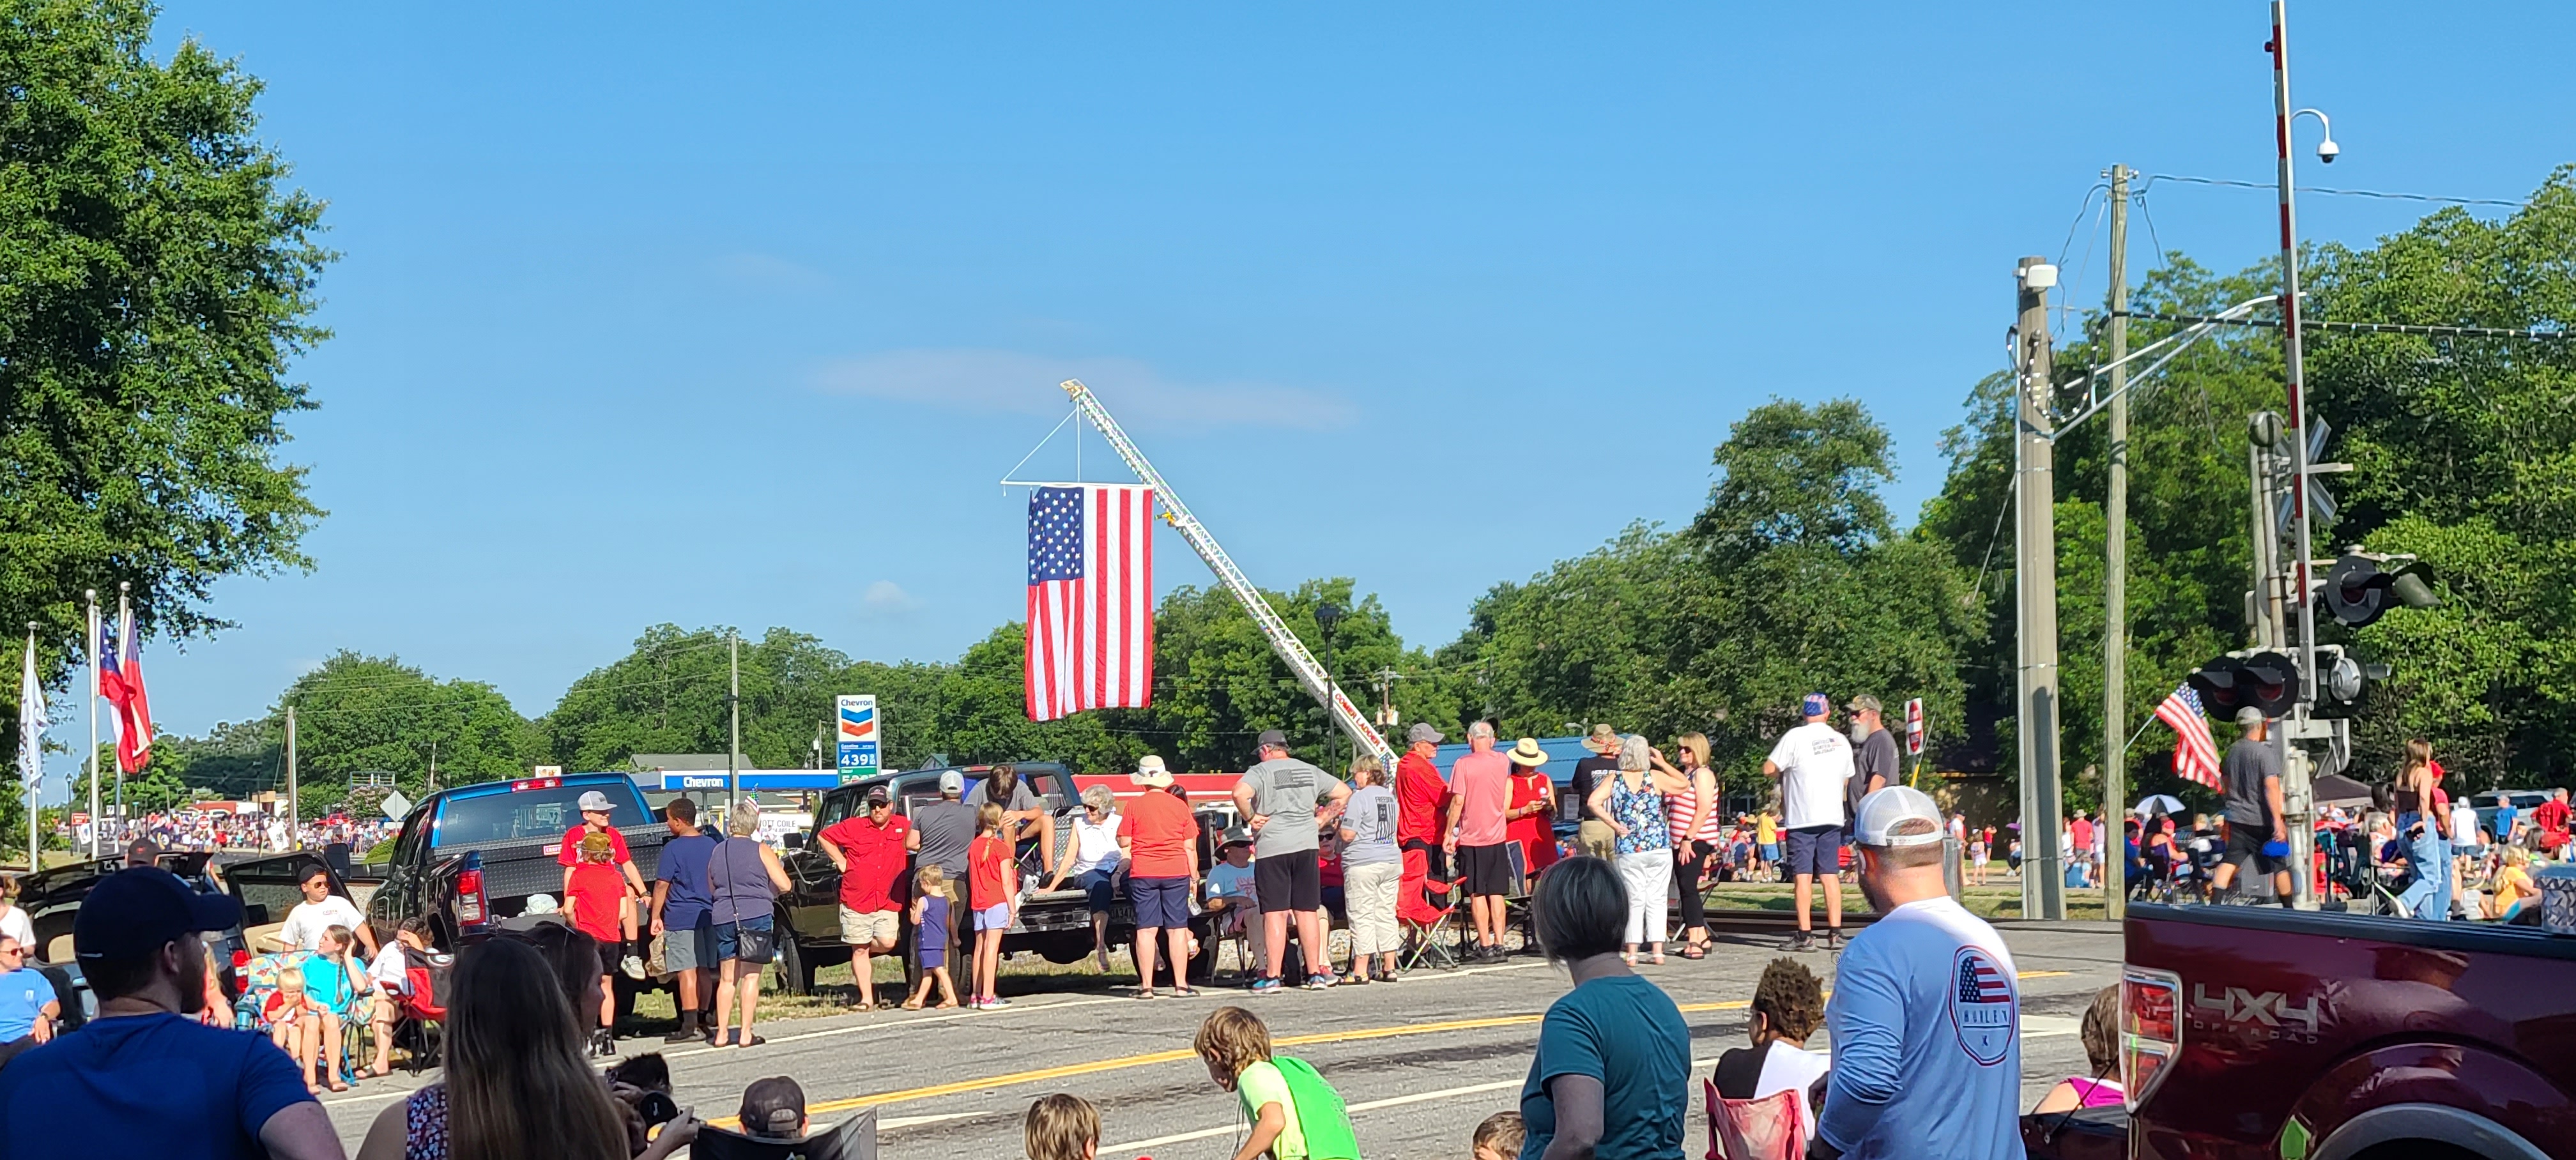 PROUD DISPLAY OF OUR AMERICAN FLAG MADE POSSIBLE BY A LOCAL VOLUNTEER FIRE DEPARTMENT.